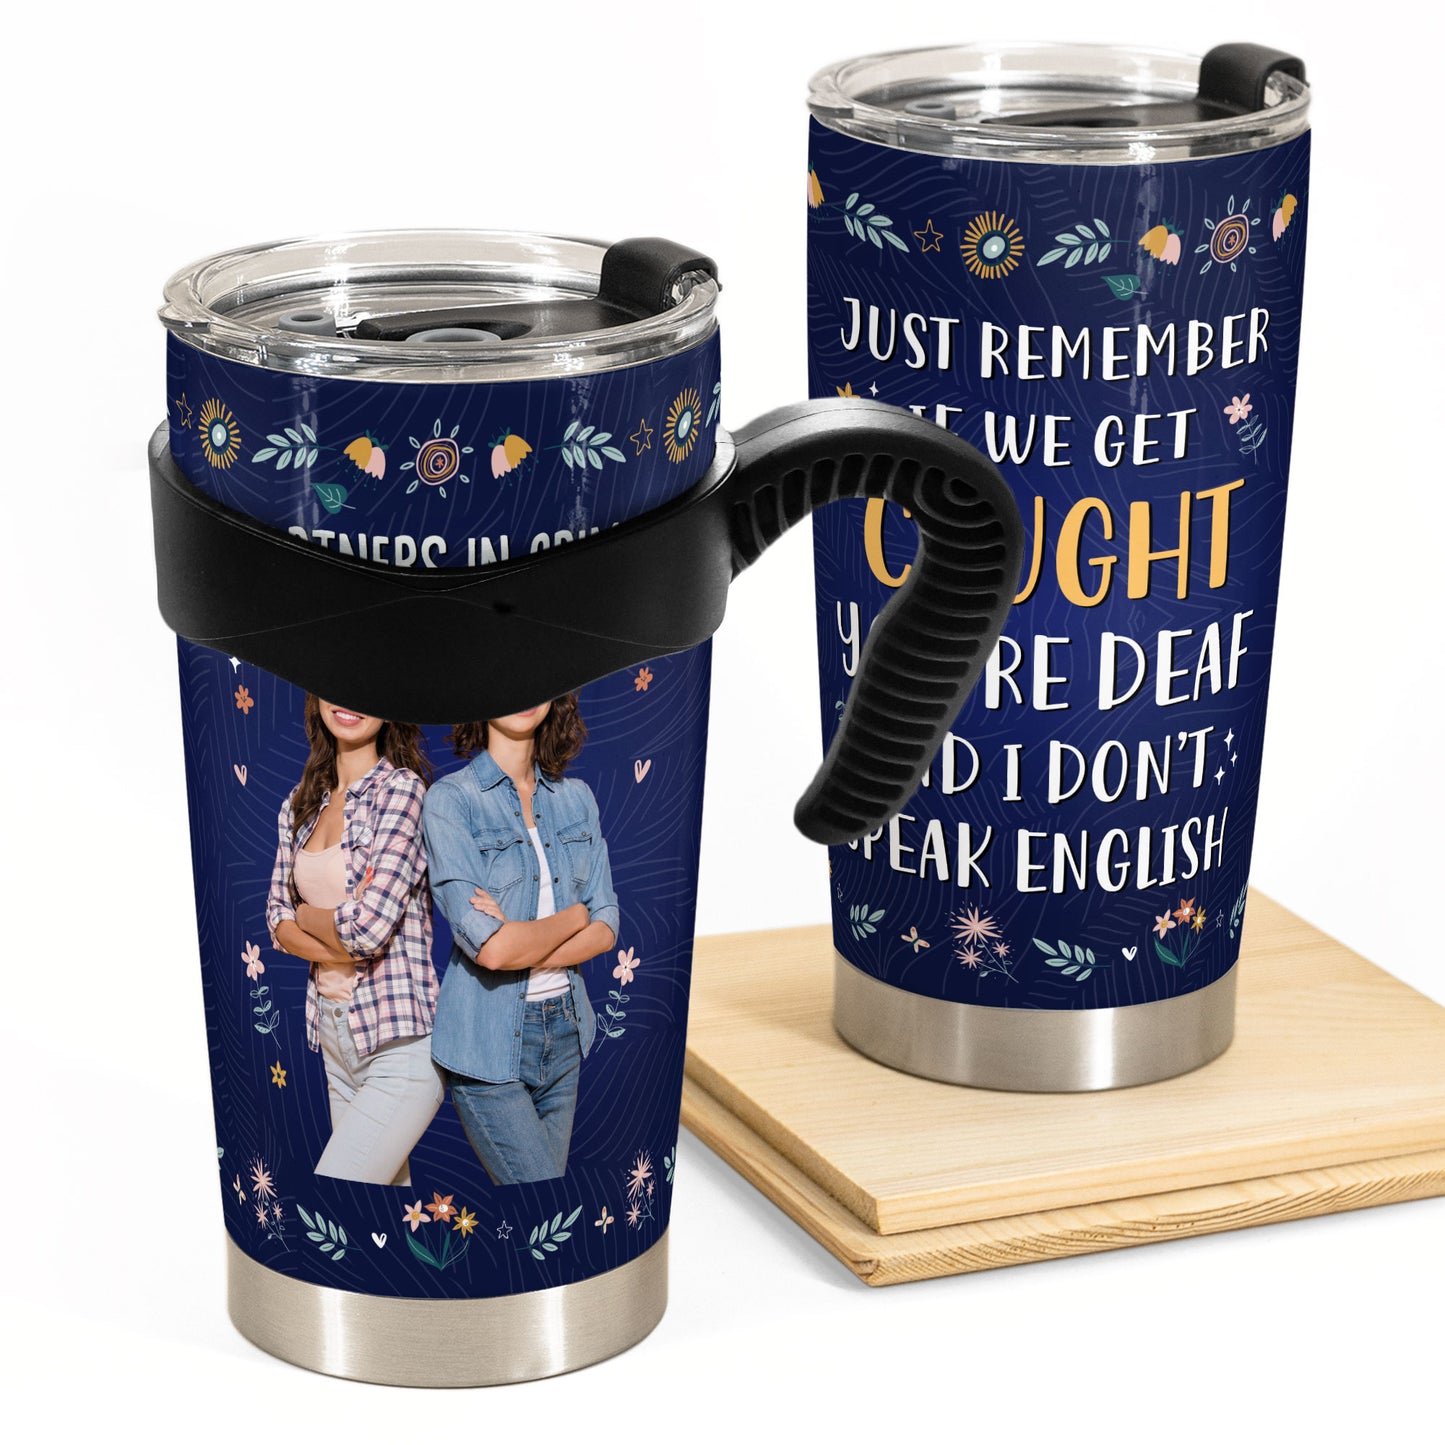 Custom Photo You're Deaf And I Don't Speak English - Personalized Photo Tumbler Cup